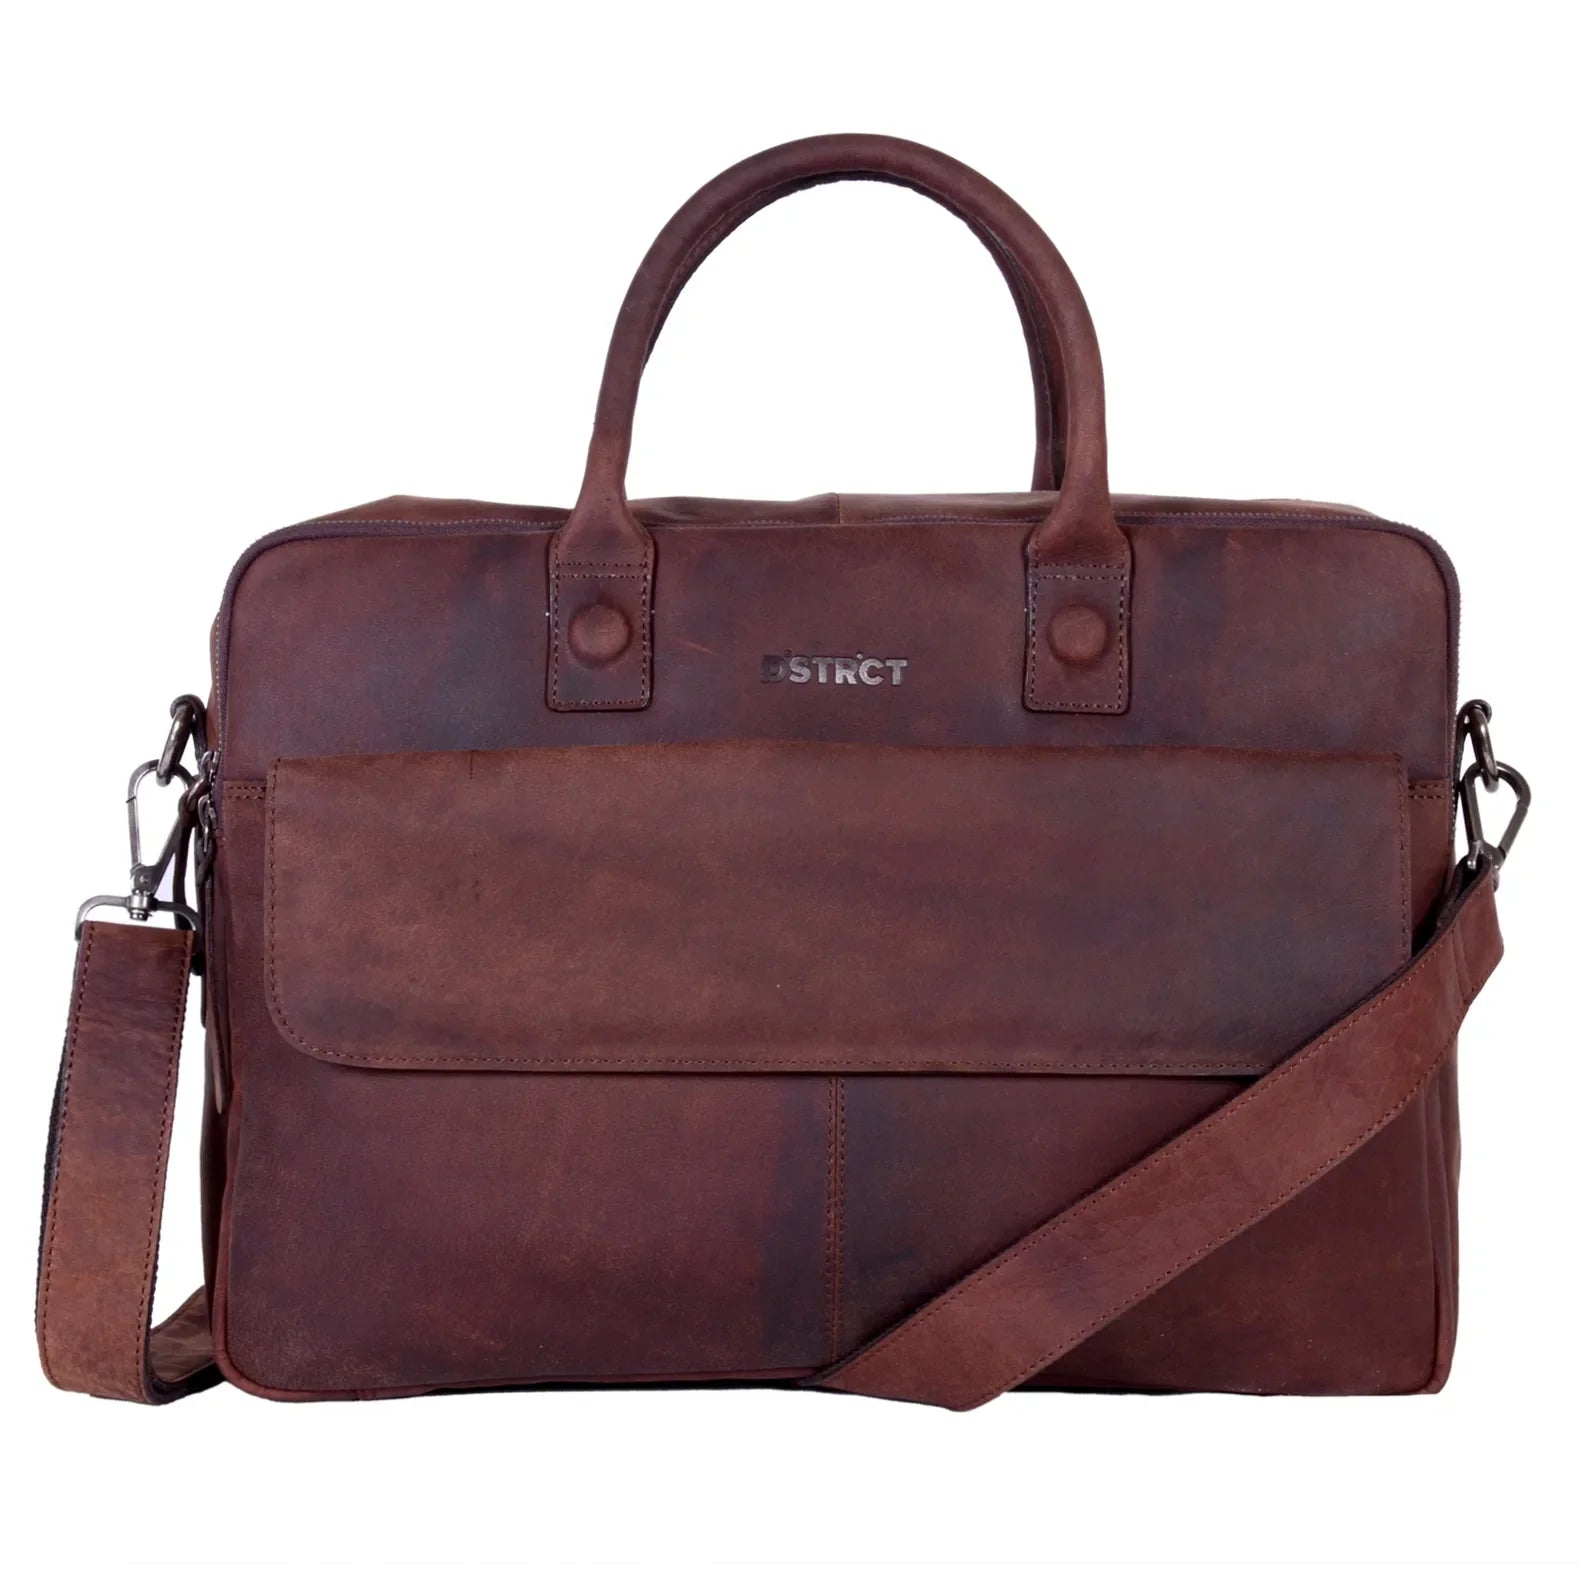 DSTRCT Wall Street Delta Business Briefcase 43 cm - brown